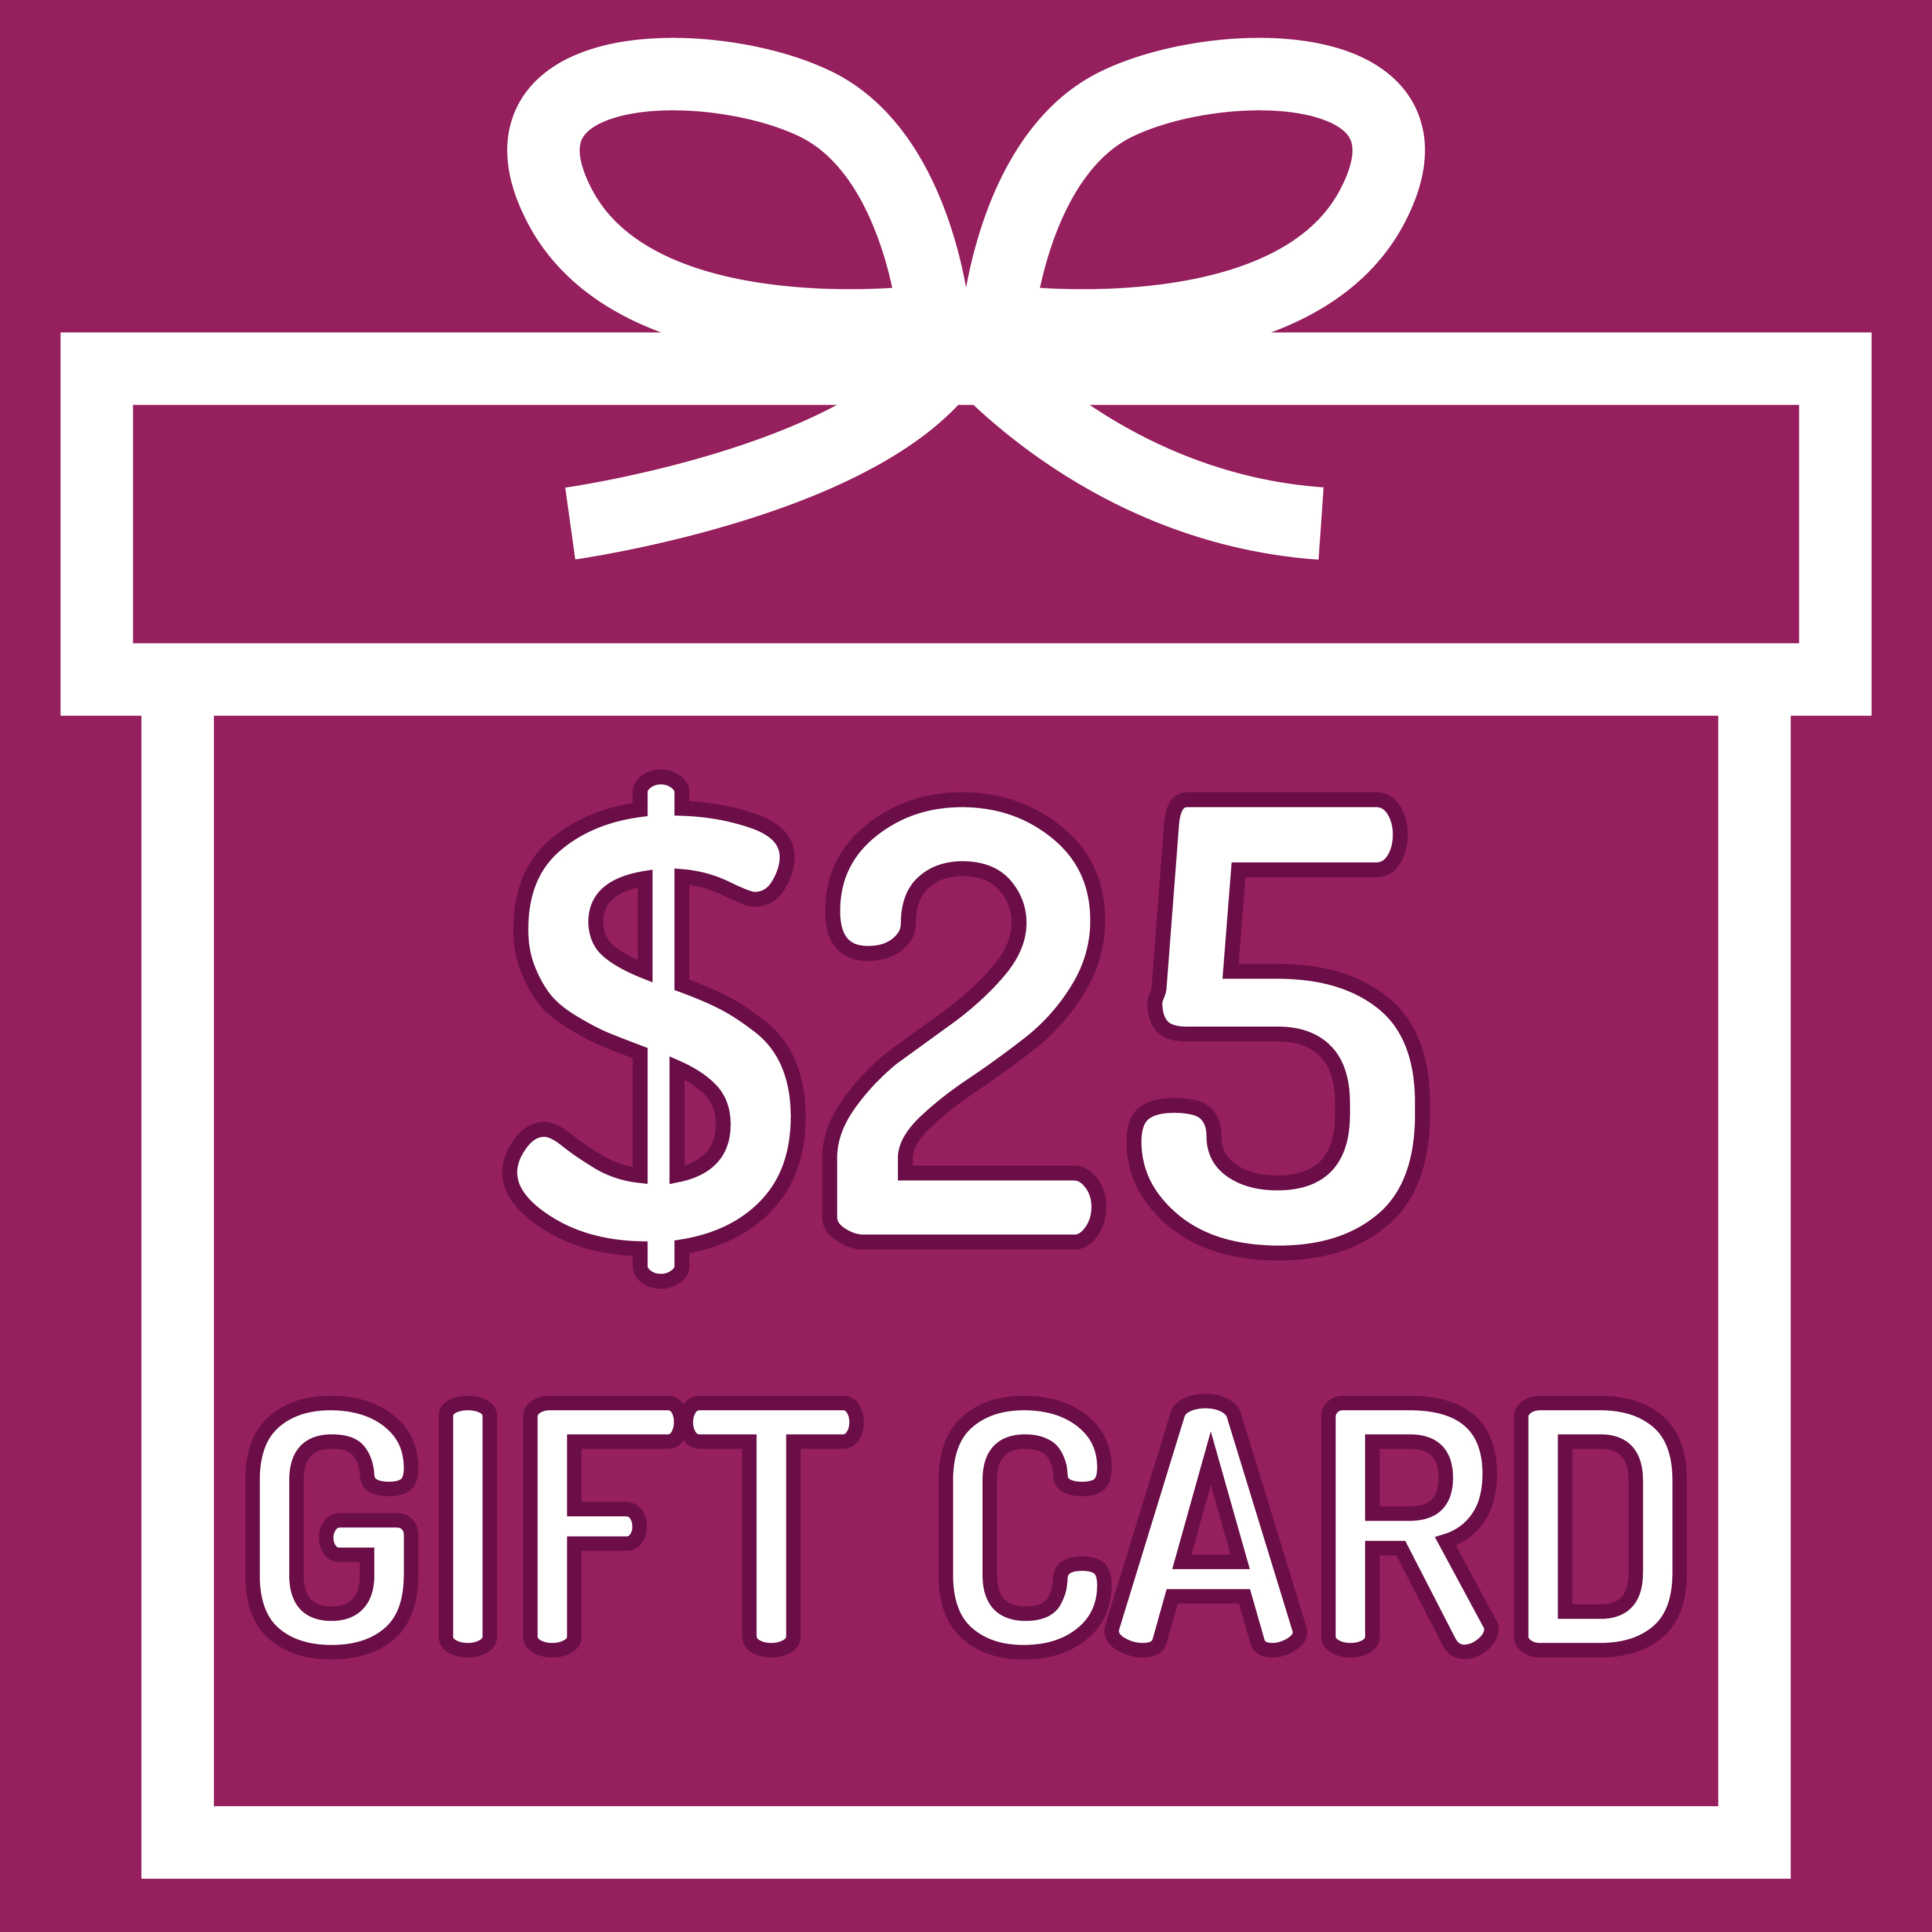 small image of a $25 gift card